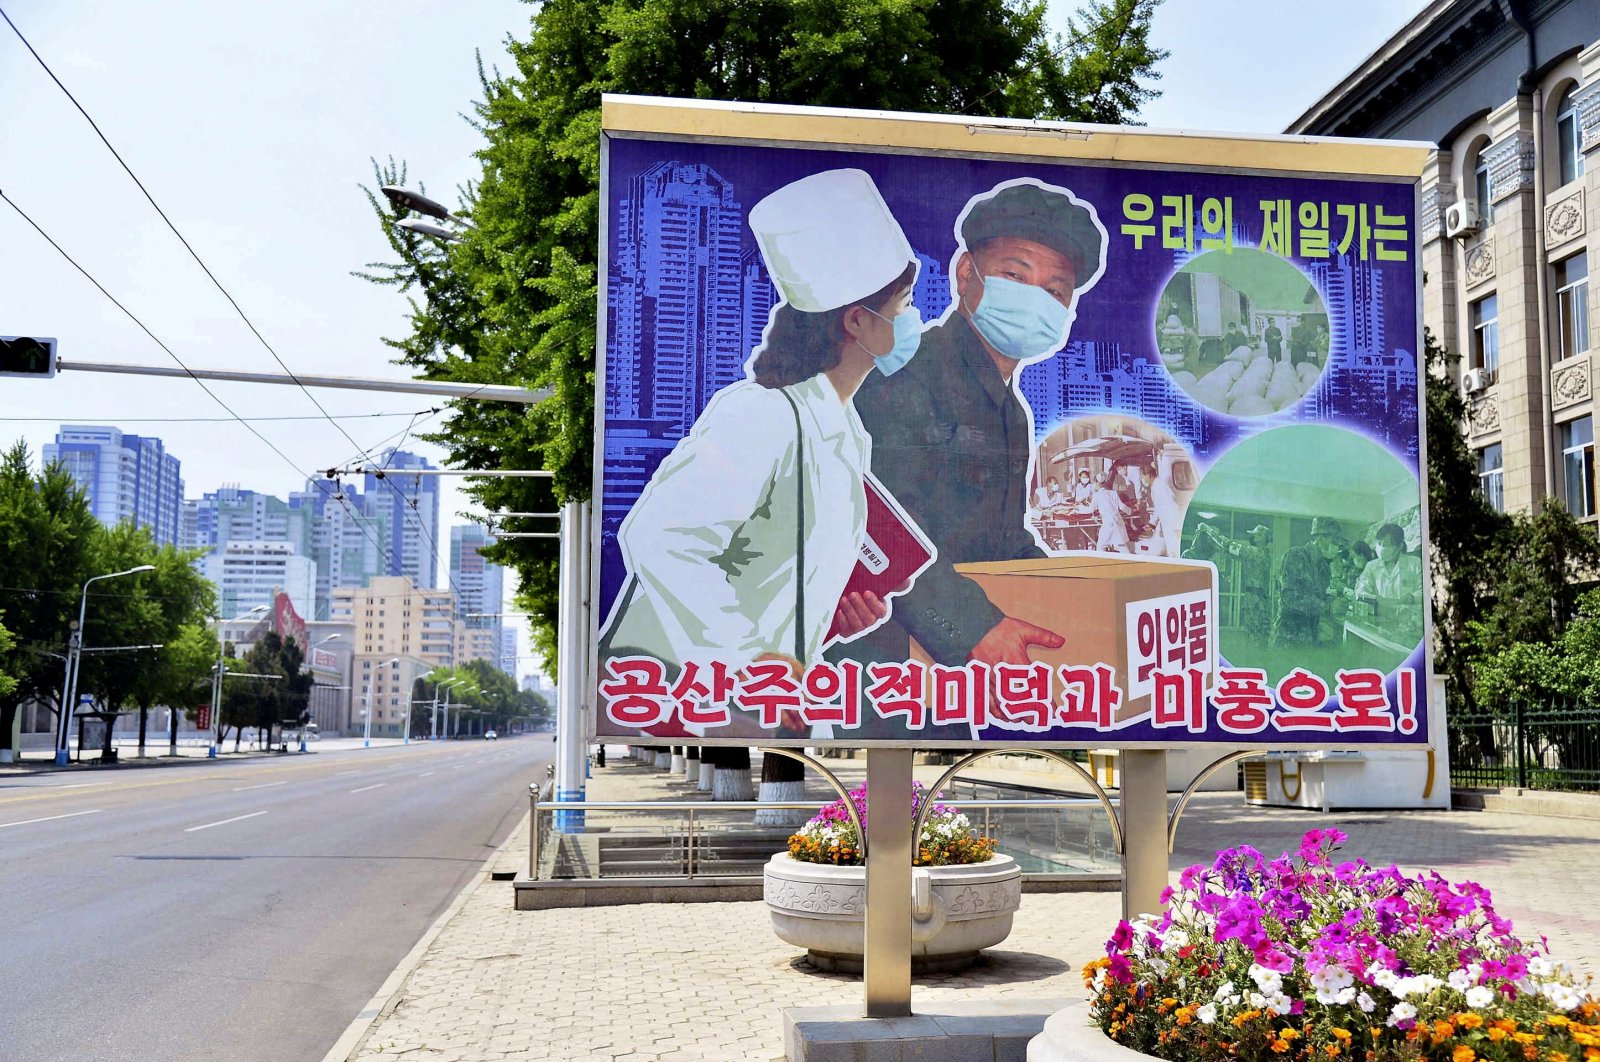 A sign depicting a scene of medical products transportation is displayed at the empty street, amid growing fears over the spread of COVID-19, Pyongyang, North Korea, May 23, 2022. (Kyodo via Reuters)